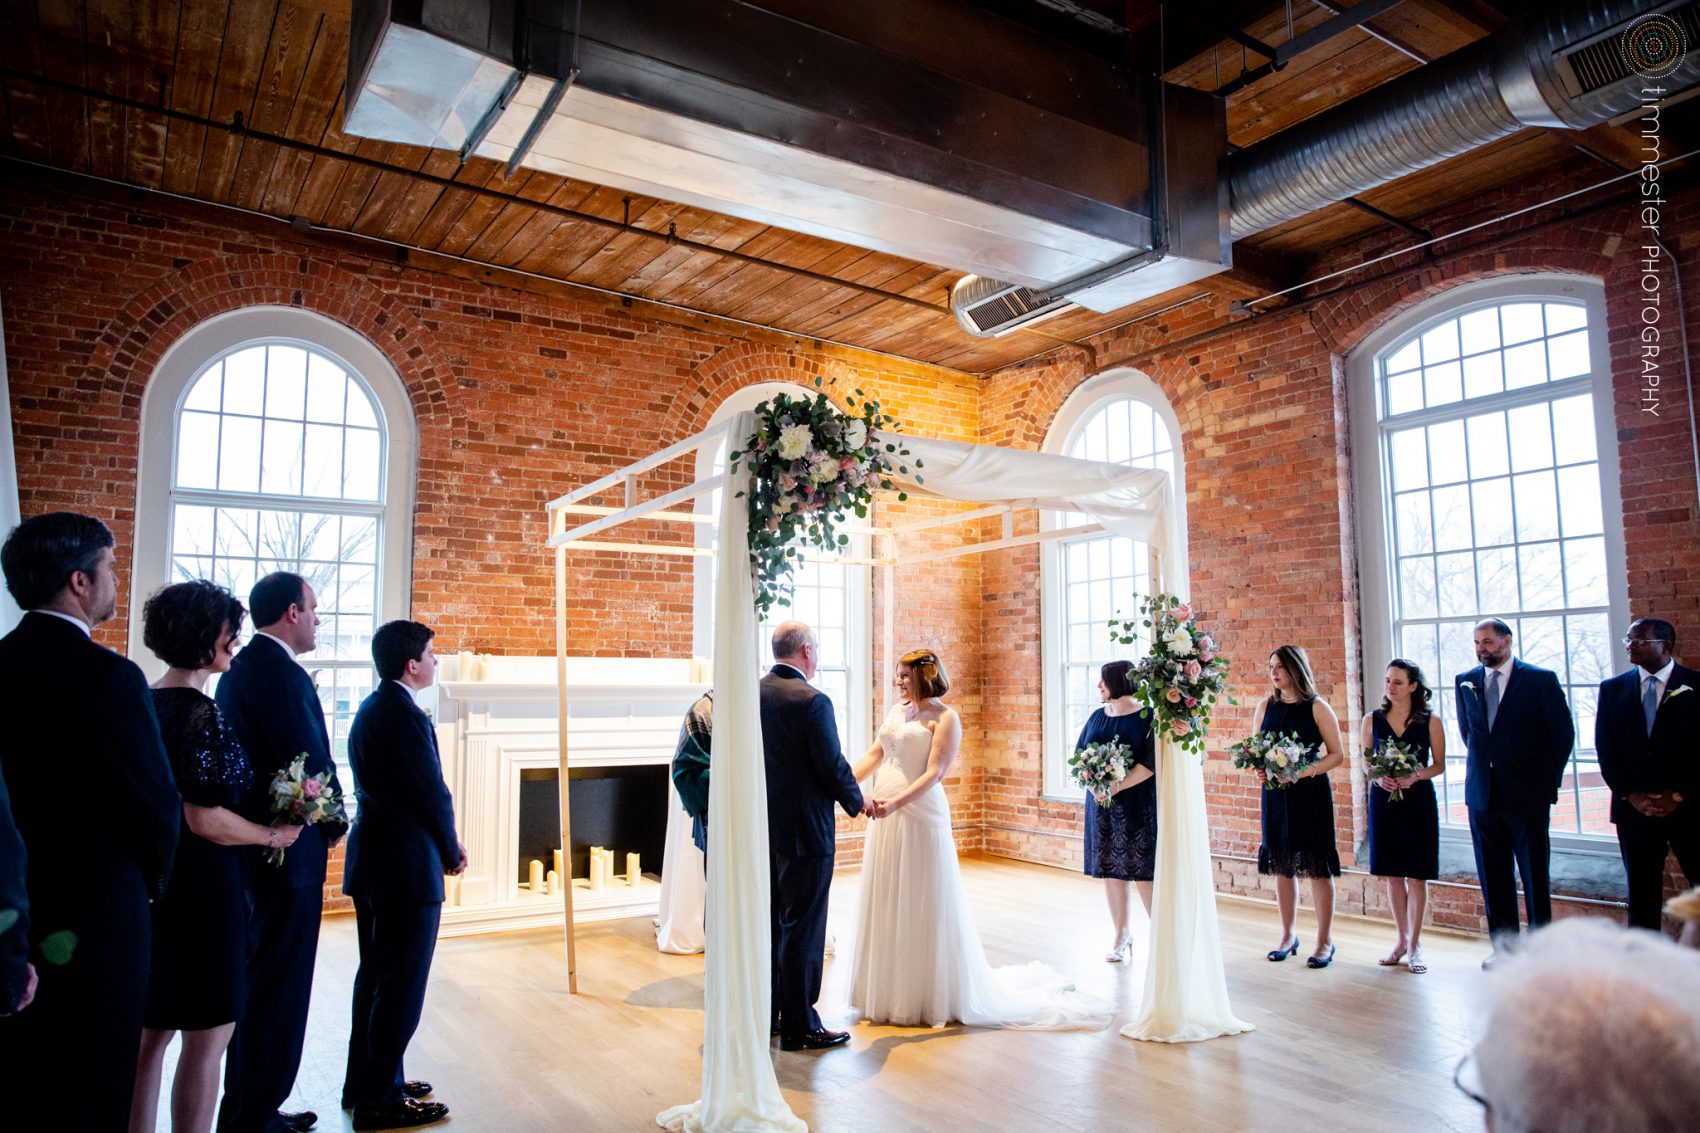 The Cotton Room in Durham, NC features an amazing ceremony space for winter weddings like Jessica + David's.